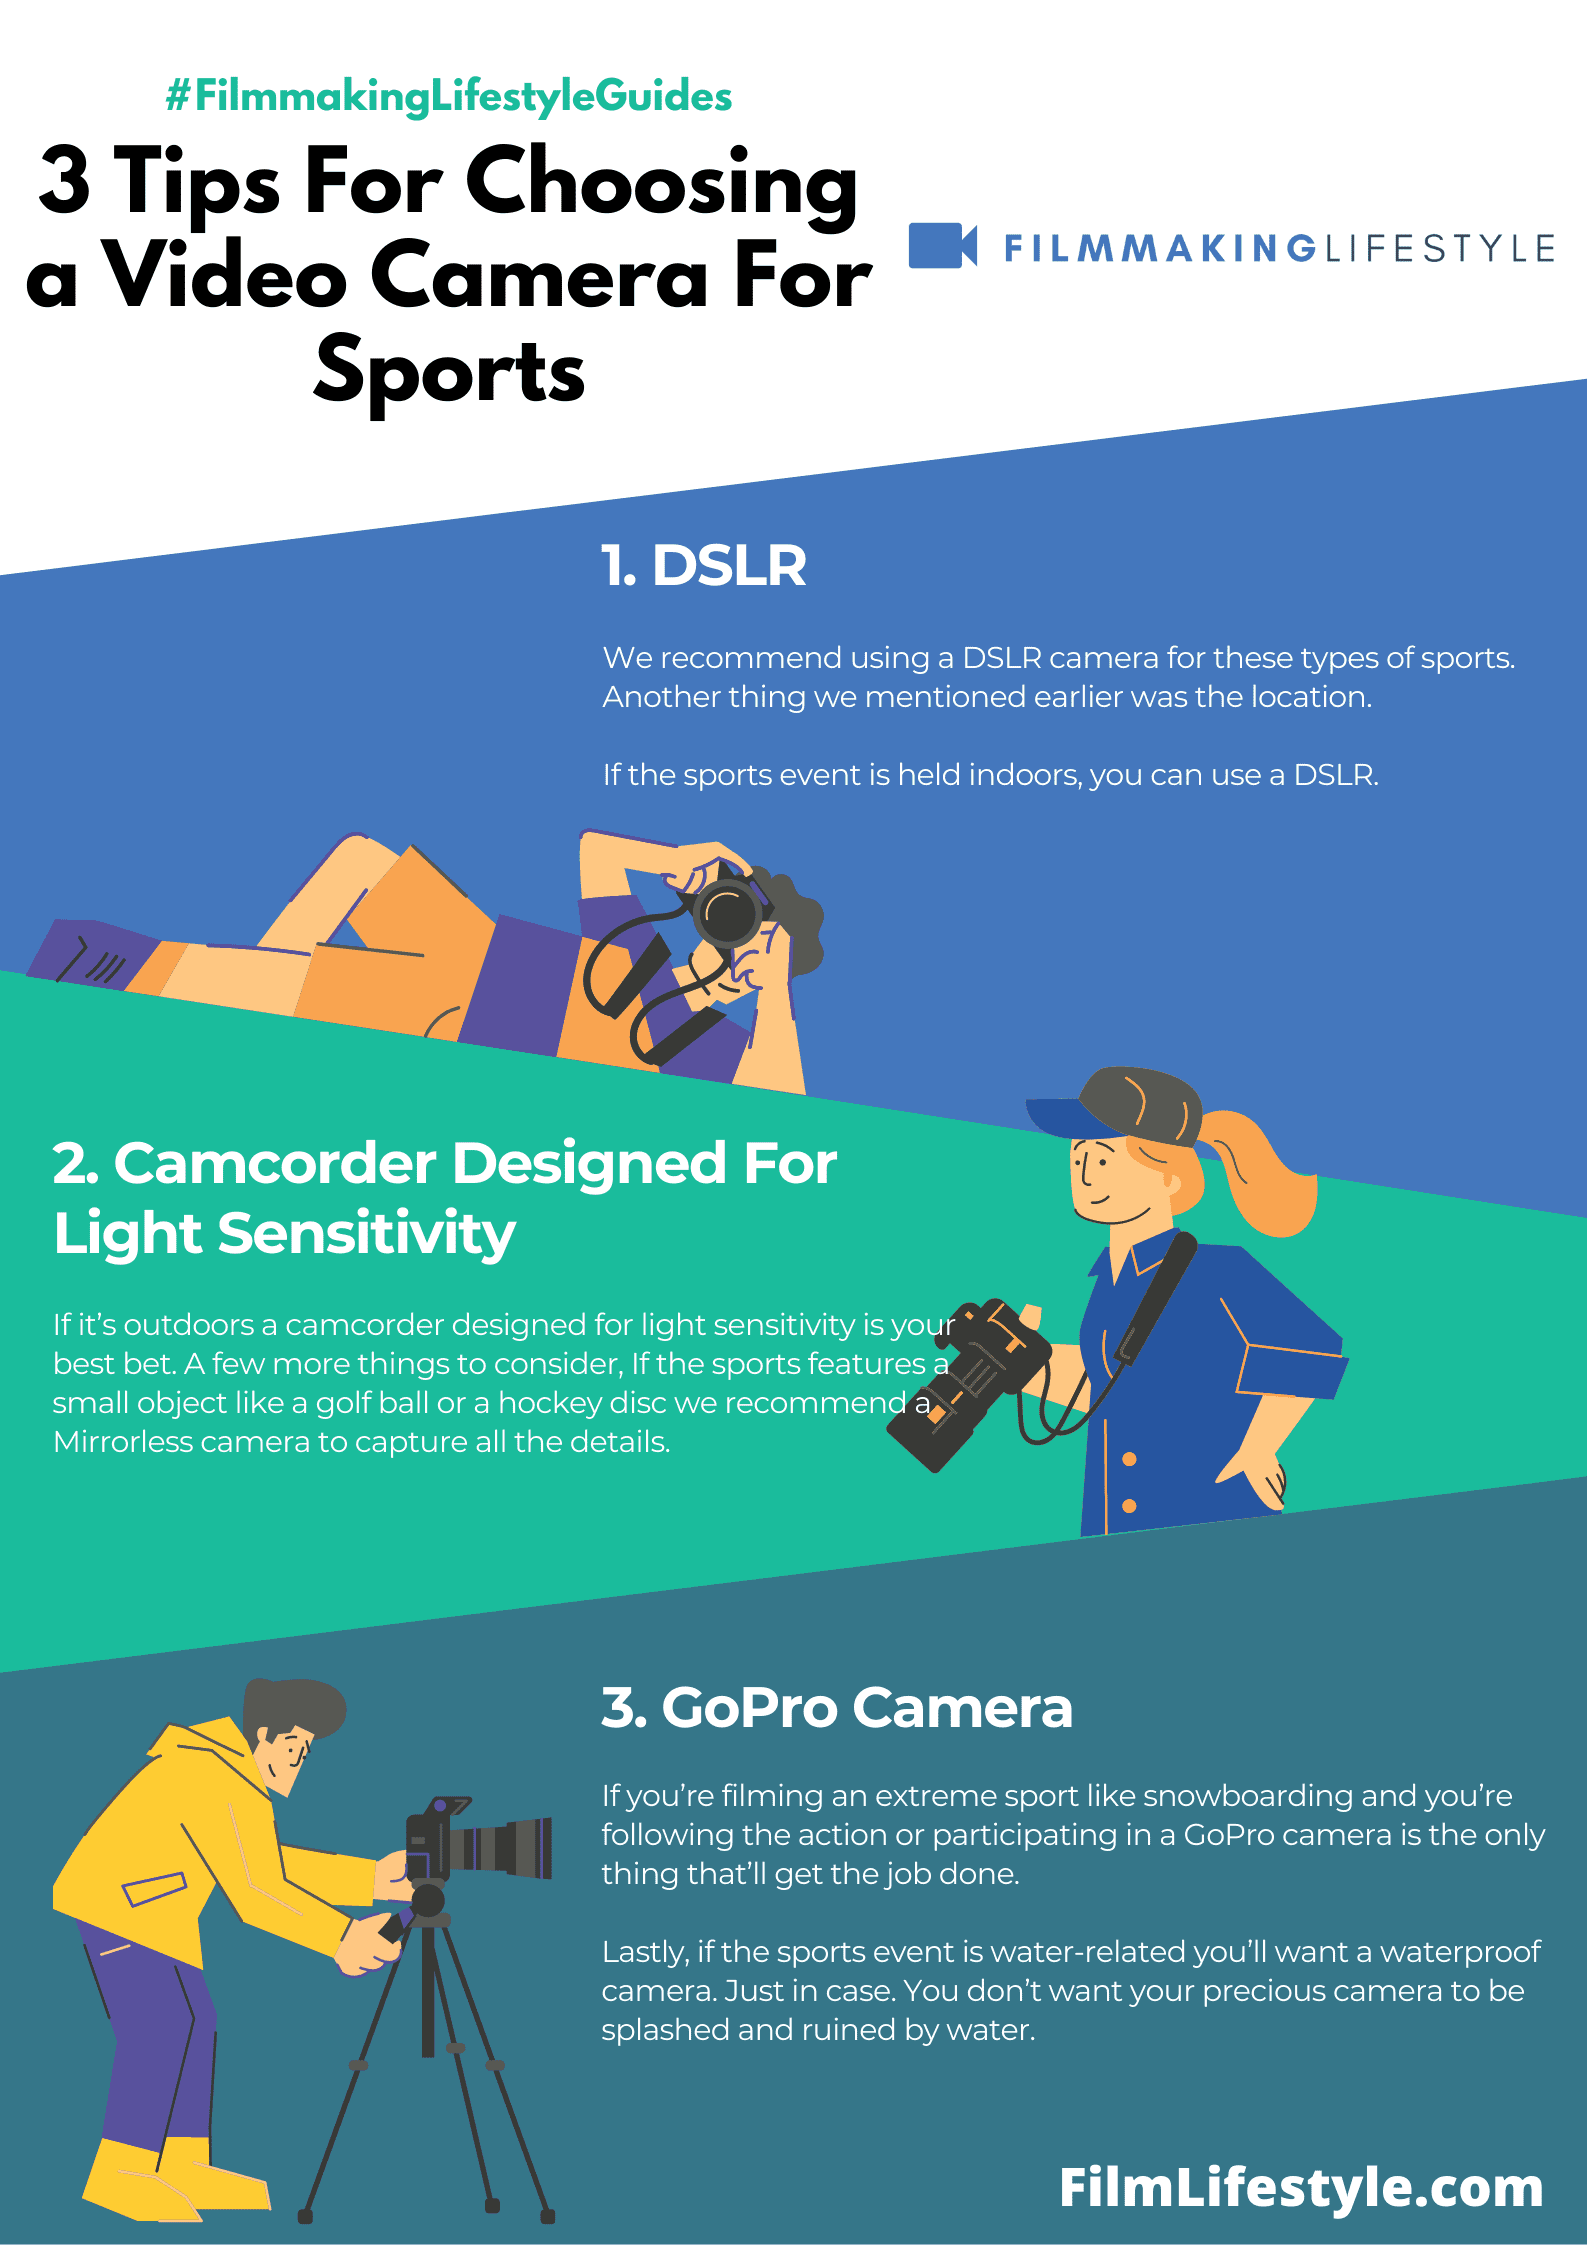 Best Video Camera For Sports